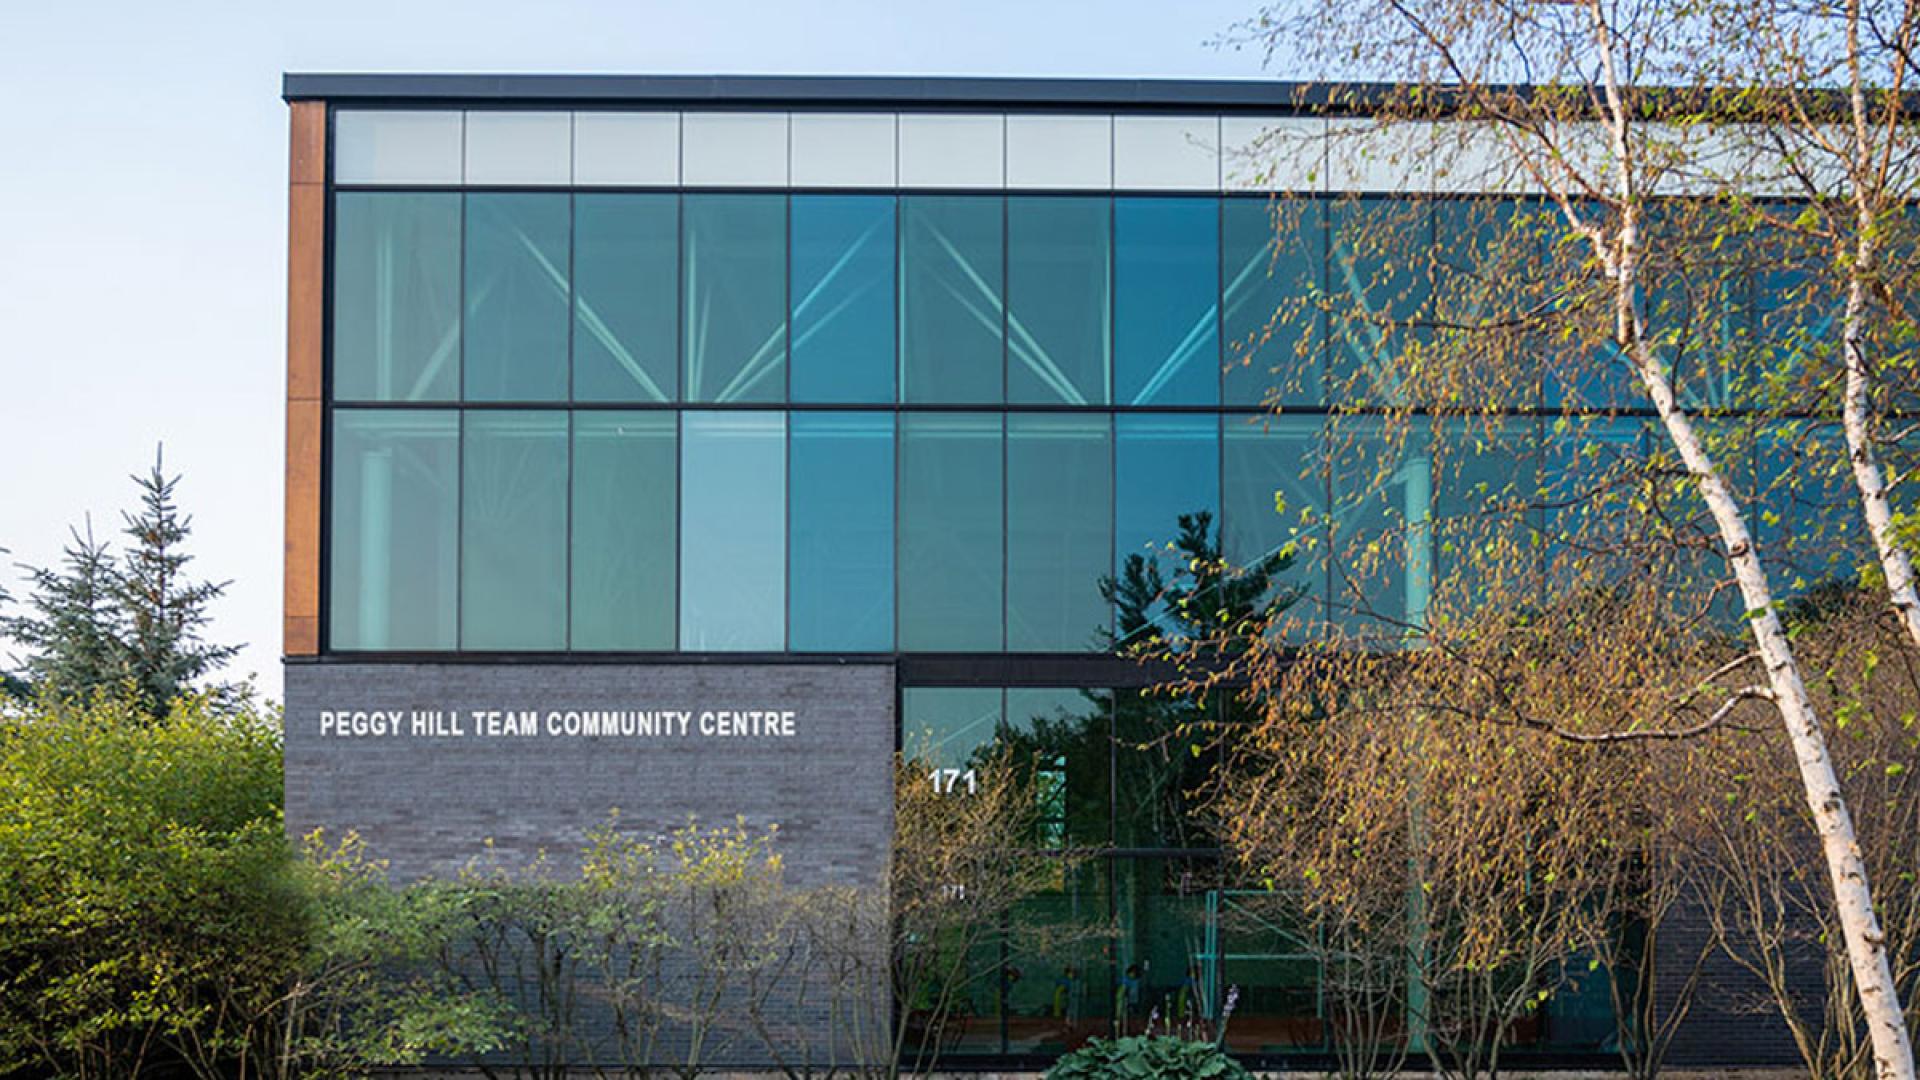 Building with signage: Peggy Hill Team Community Centre